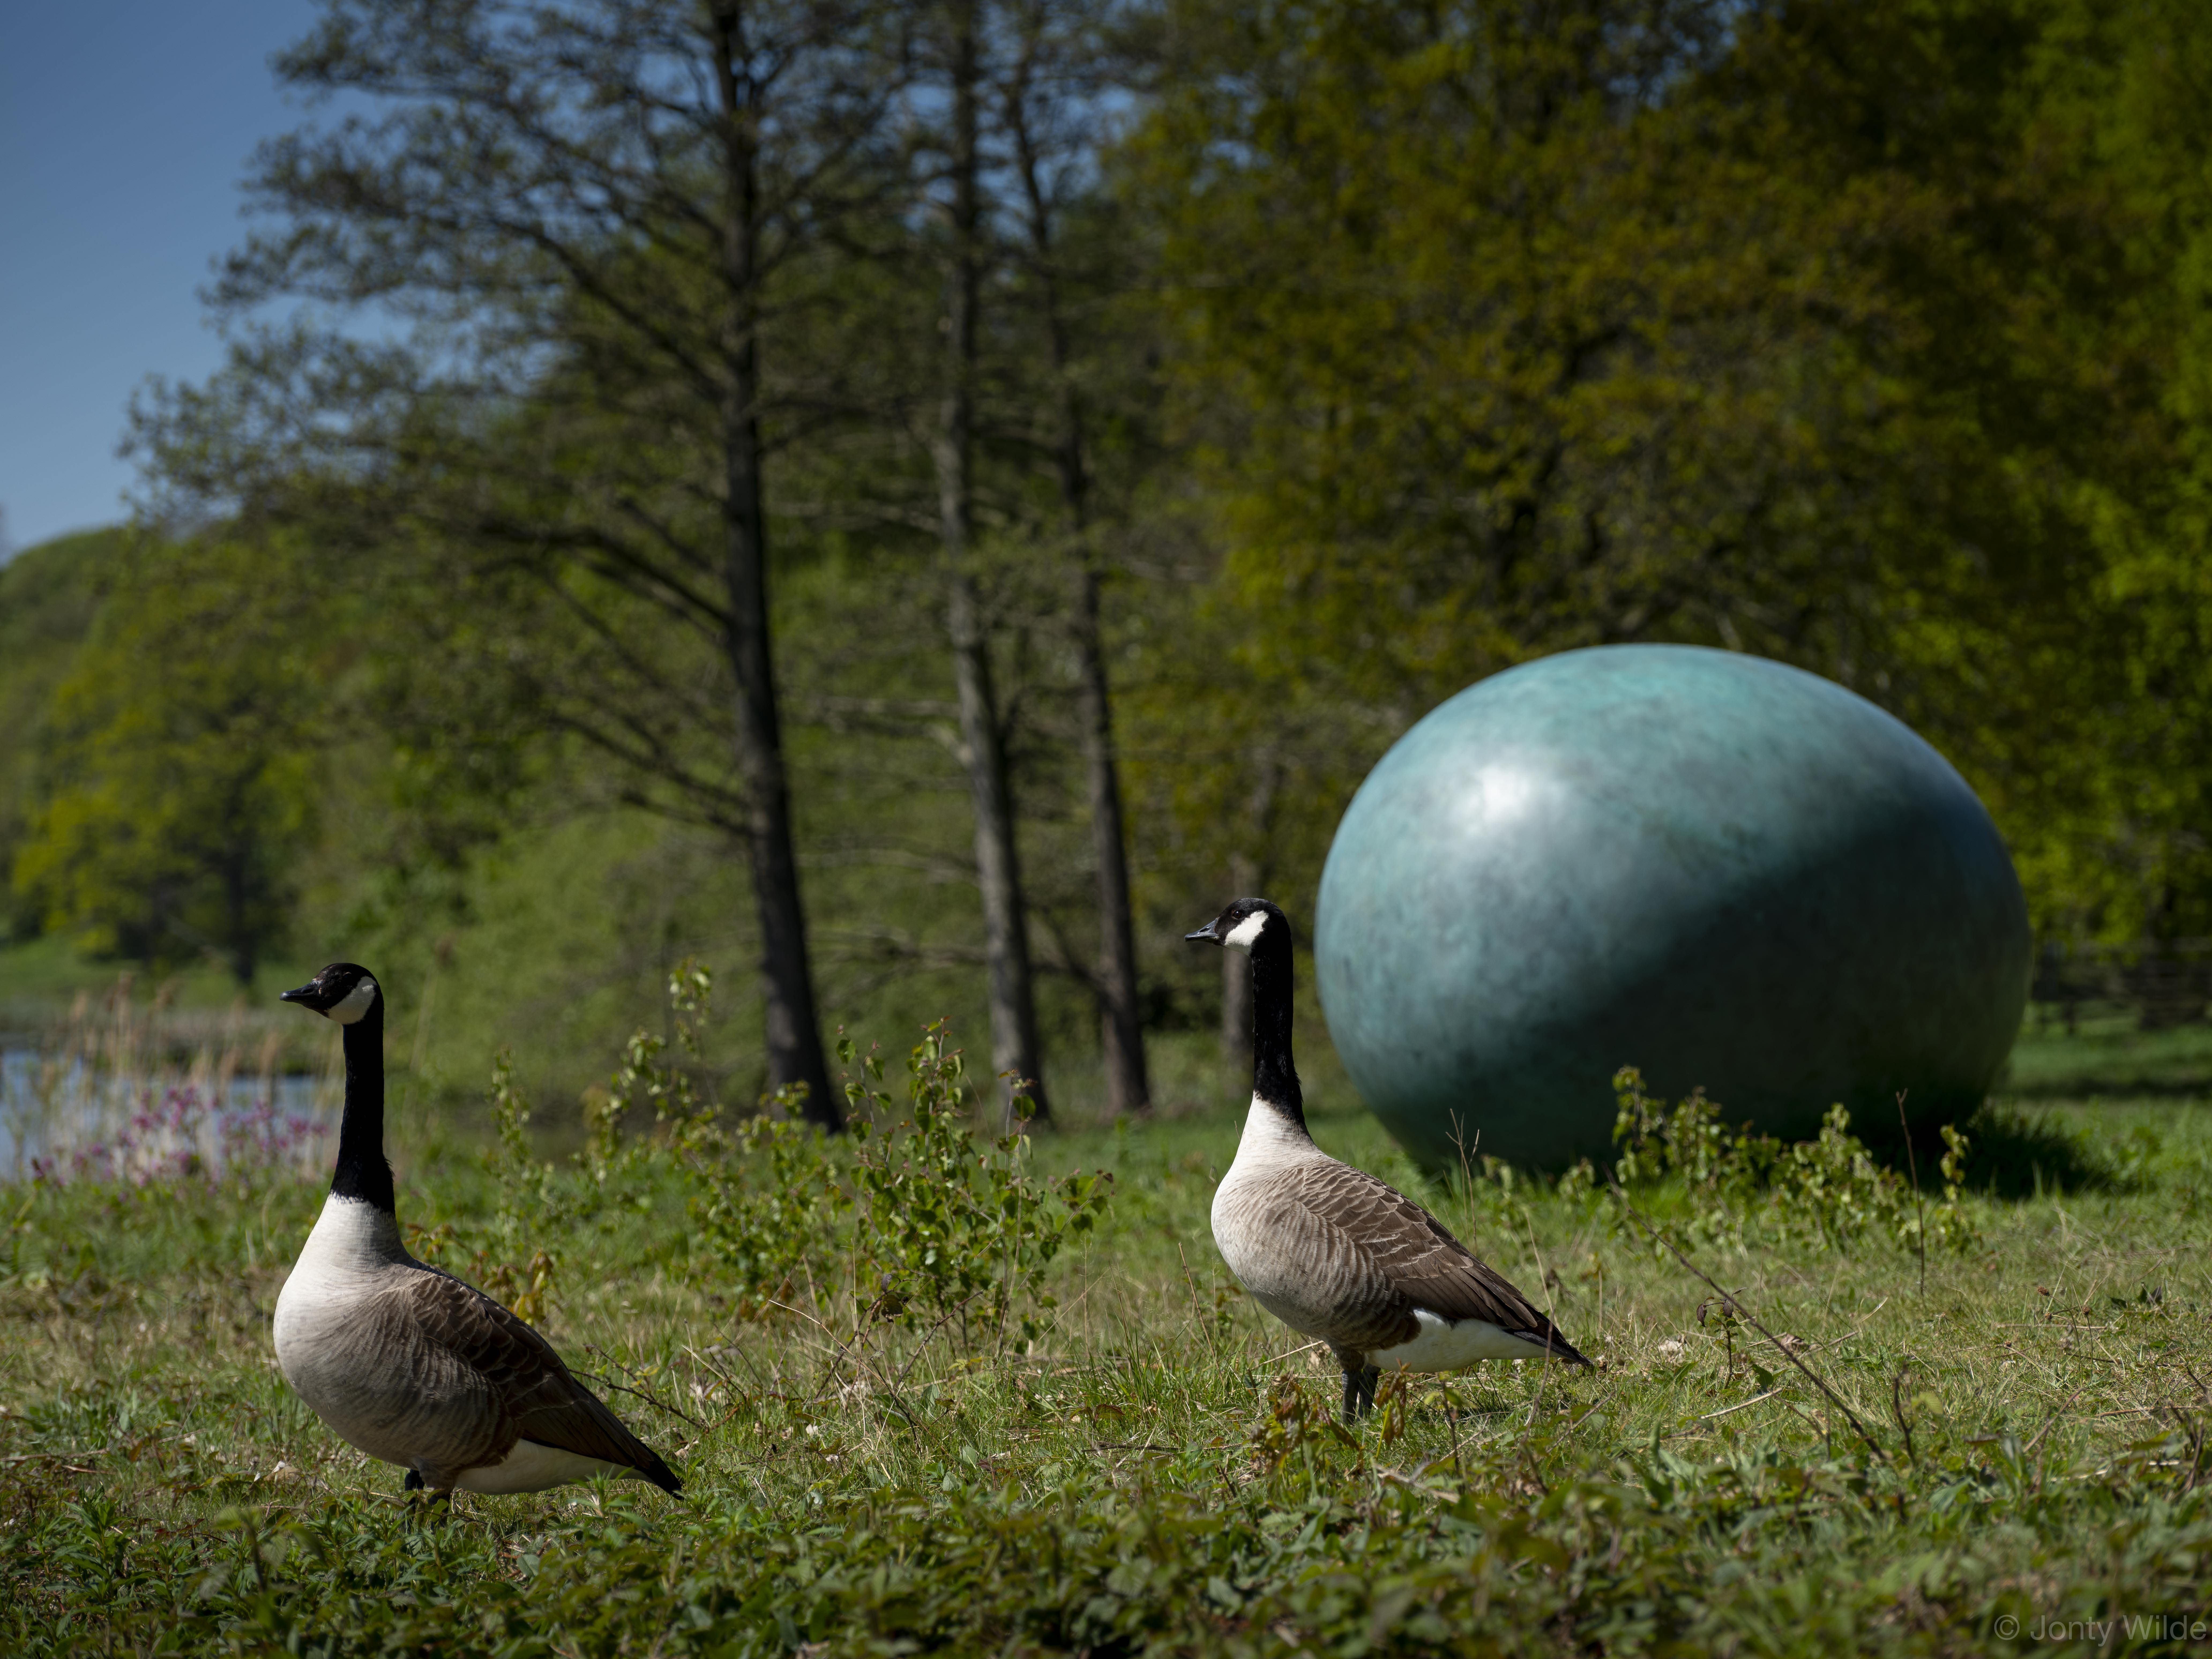 Two Canada geese standing in front of a large green egg shaped sculpture.